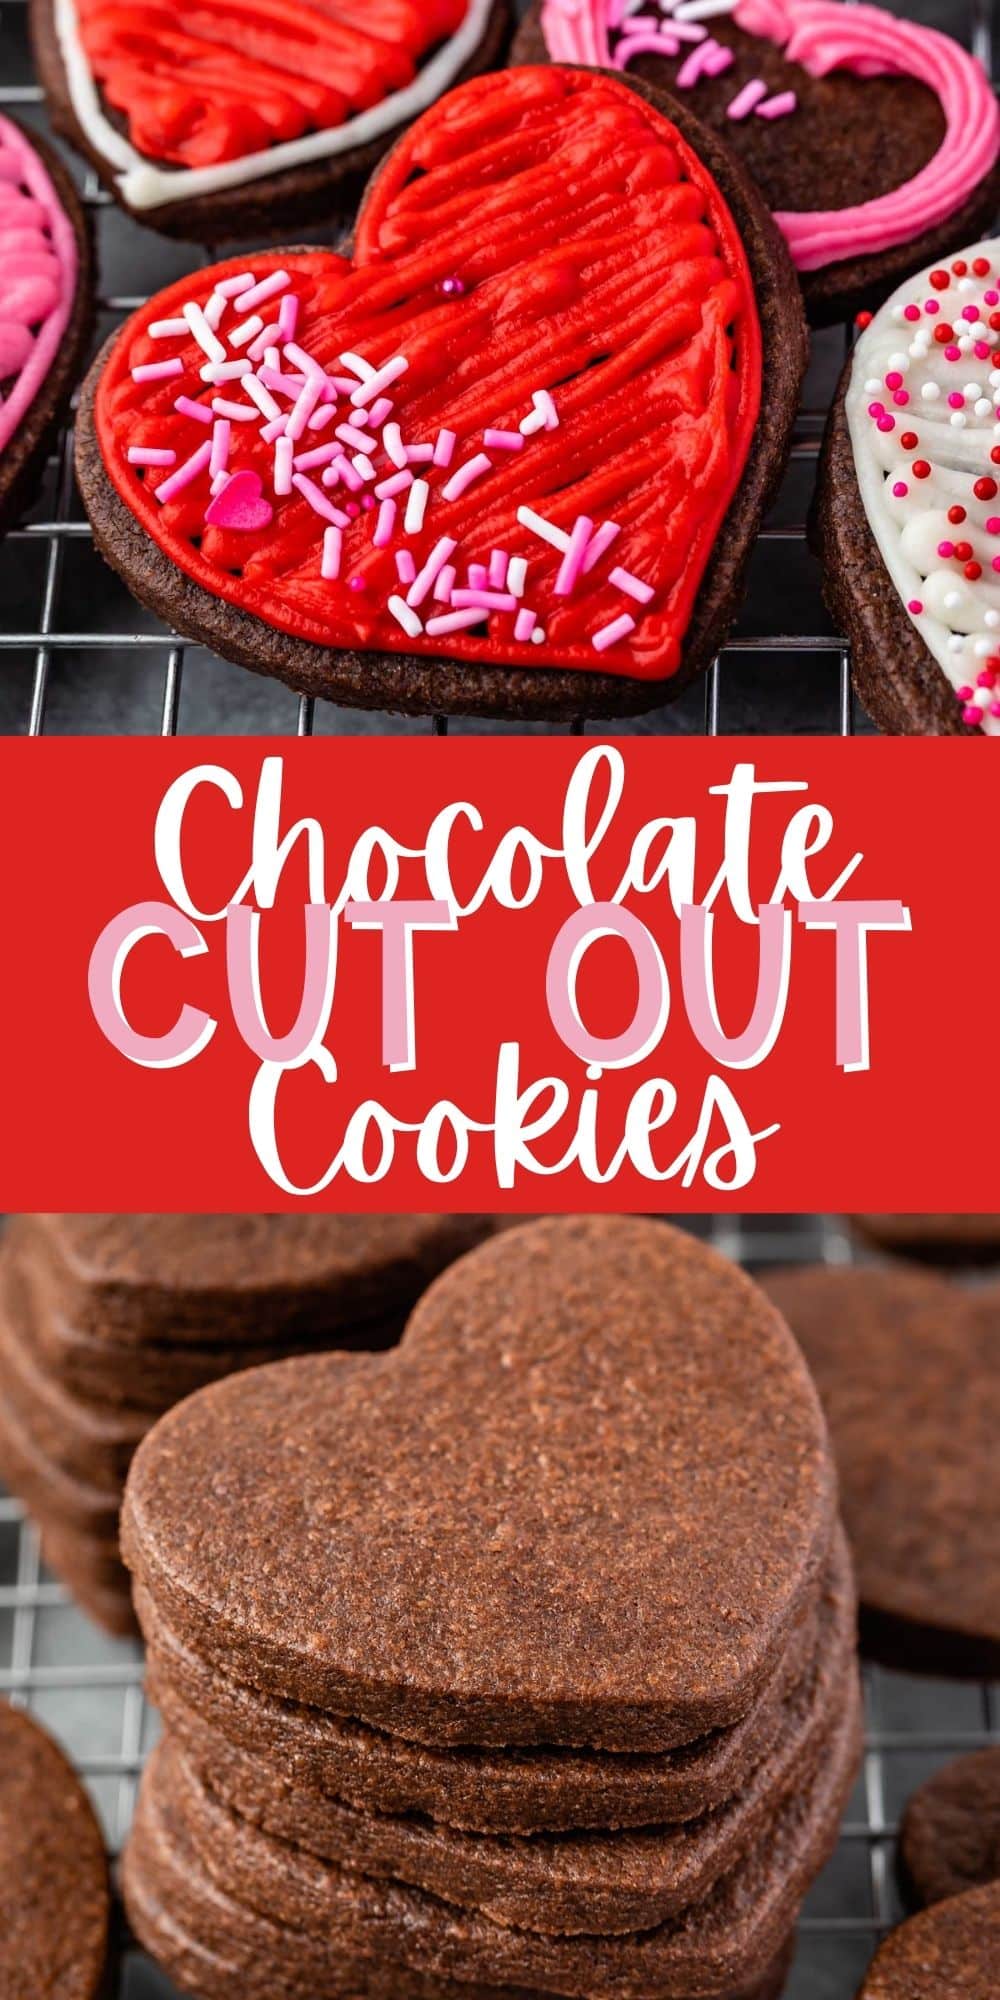 two photos of valentines day themed heart shaped chocolate cookies with words on the image